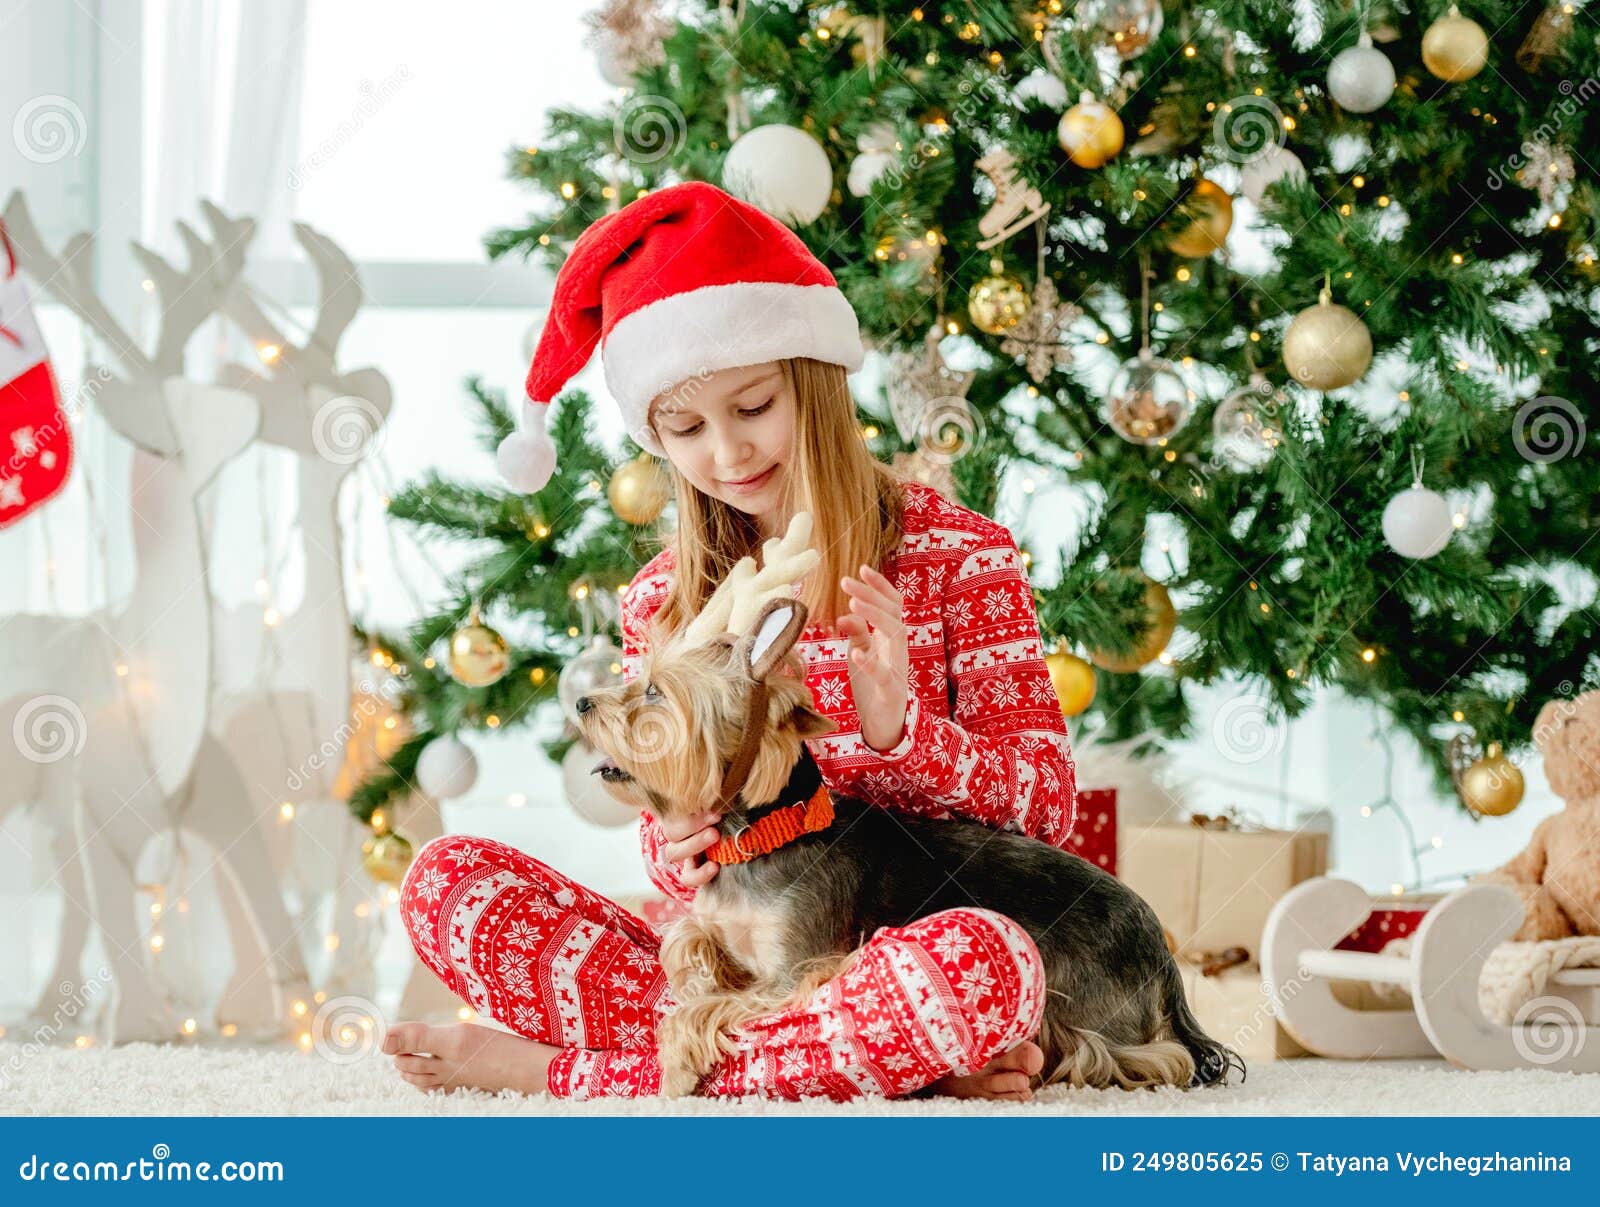 Child in Christmas time stock image. Image of beautiful - 249805625